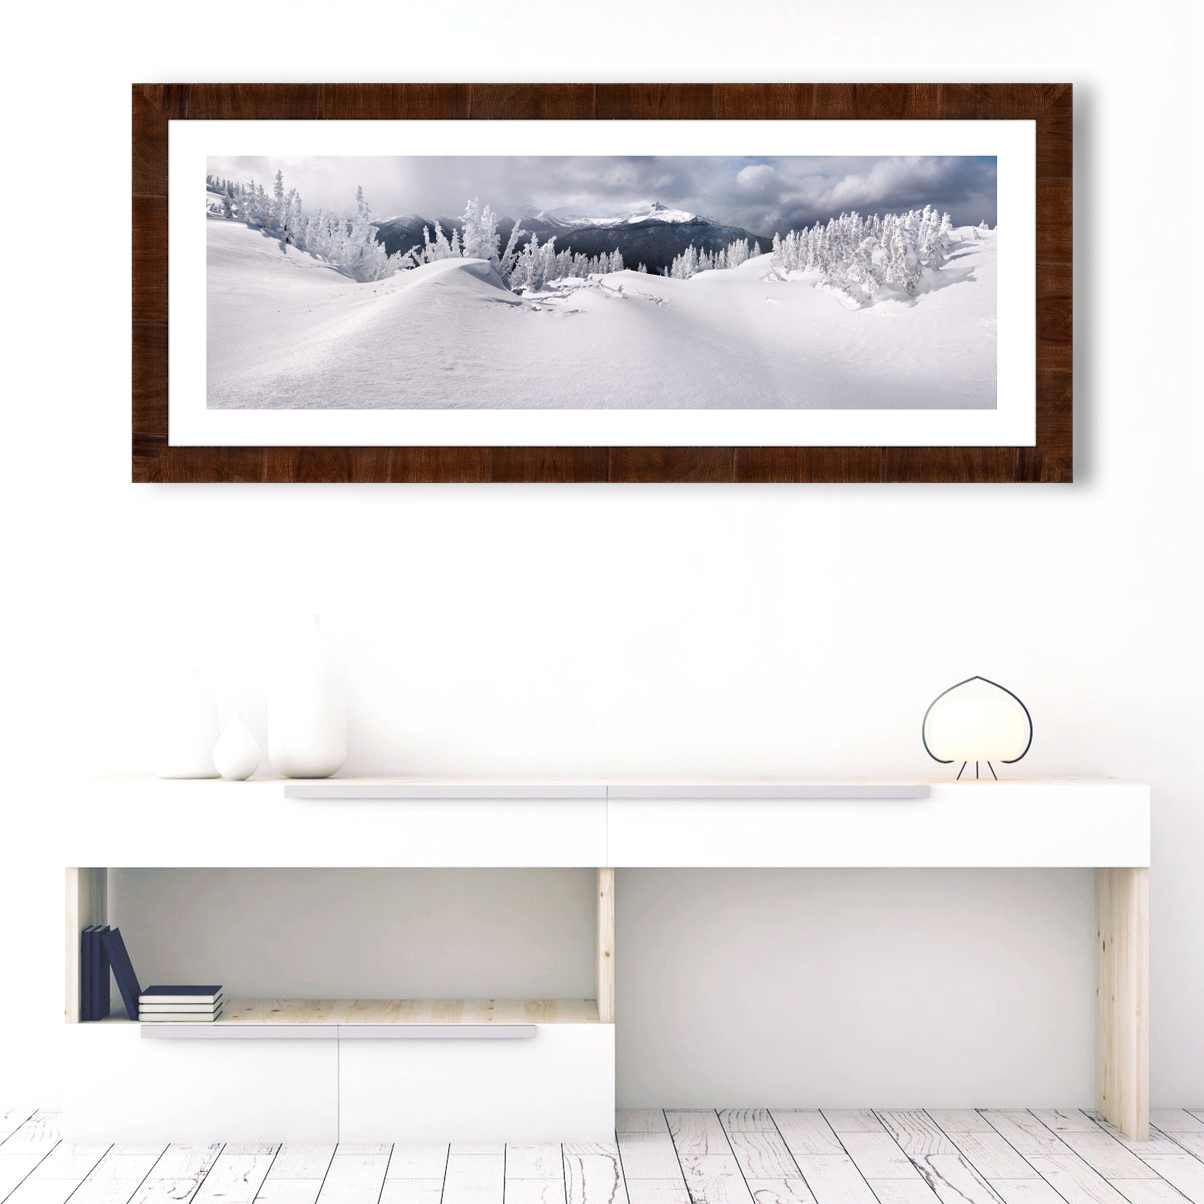 New Product – Gallery Frames